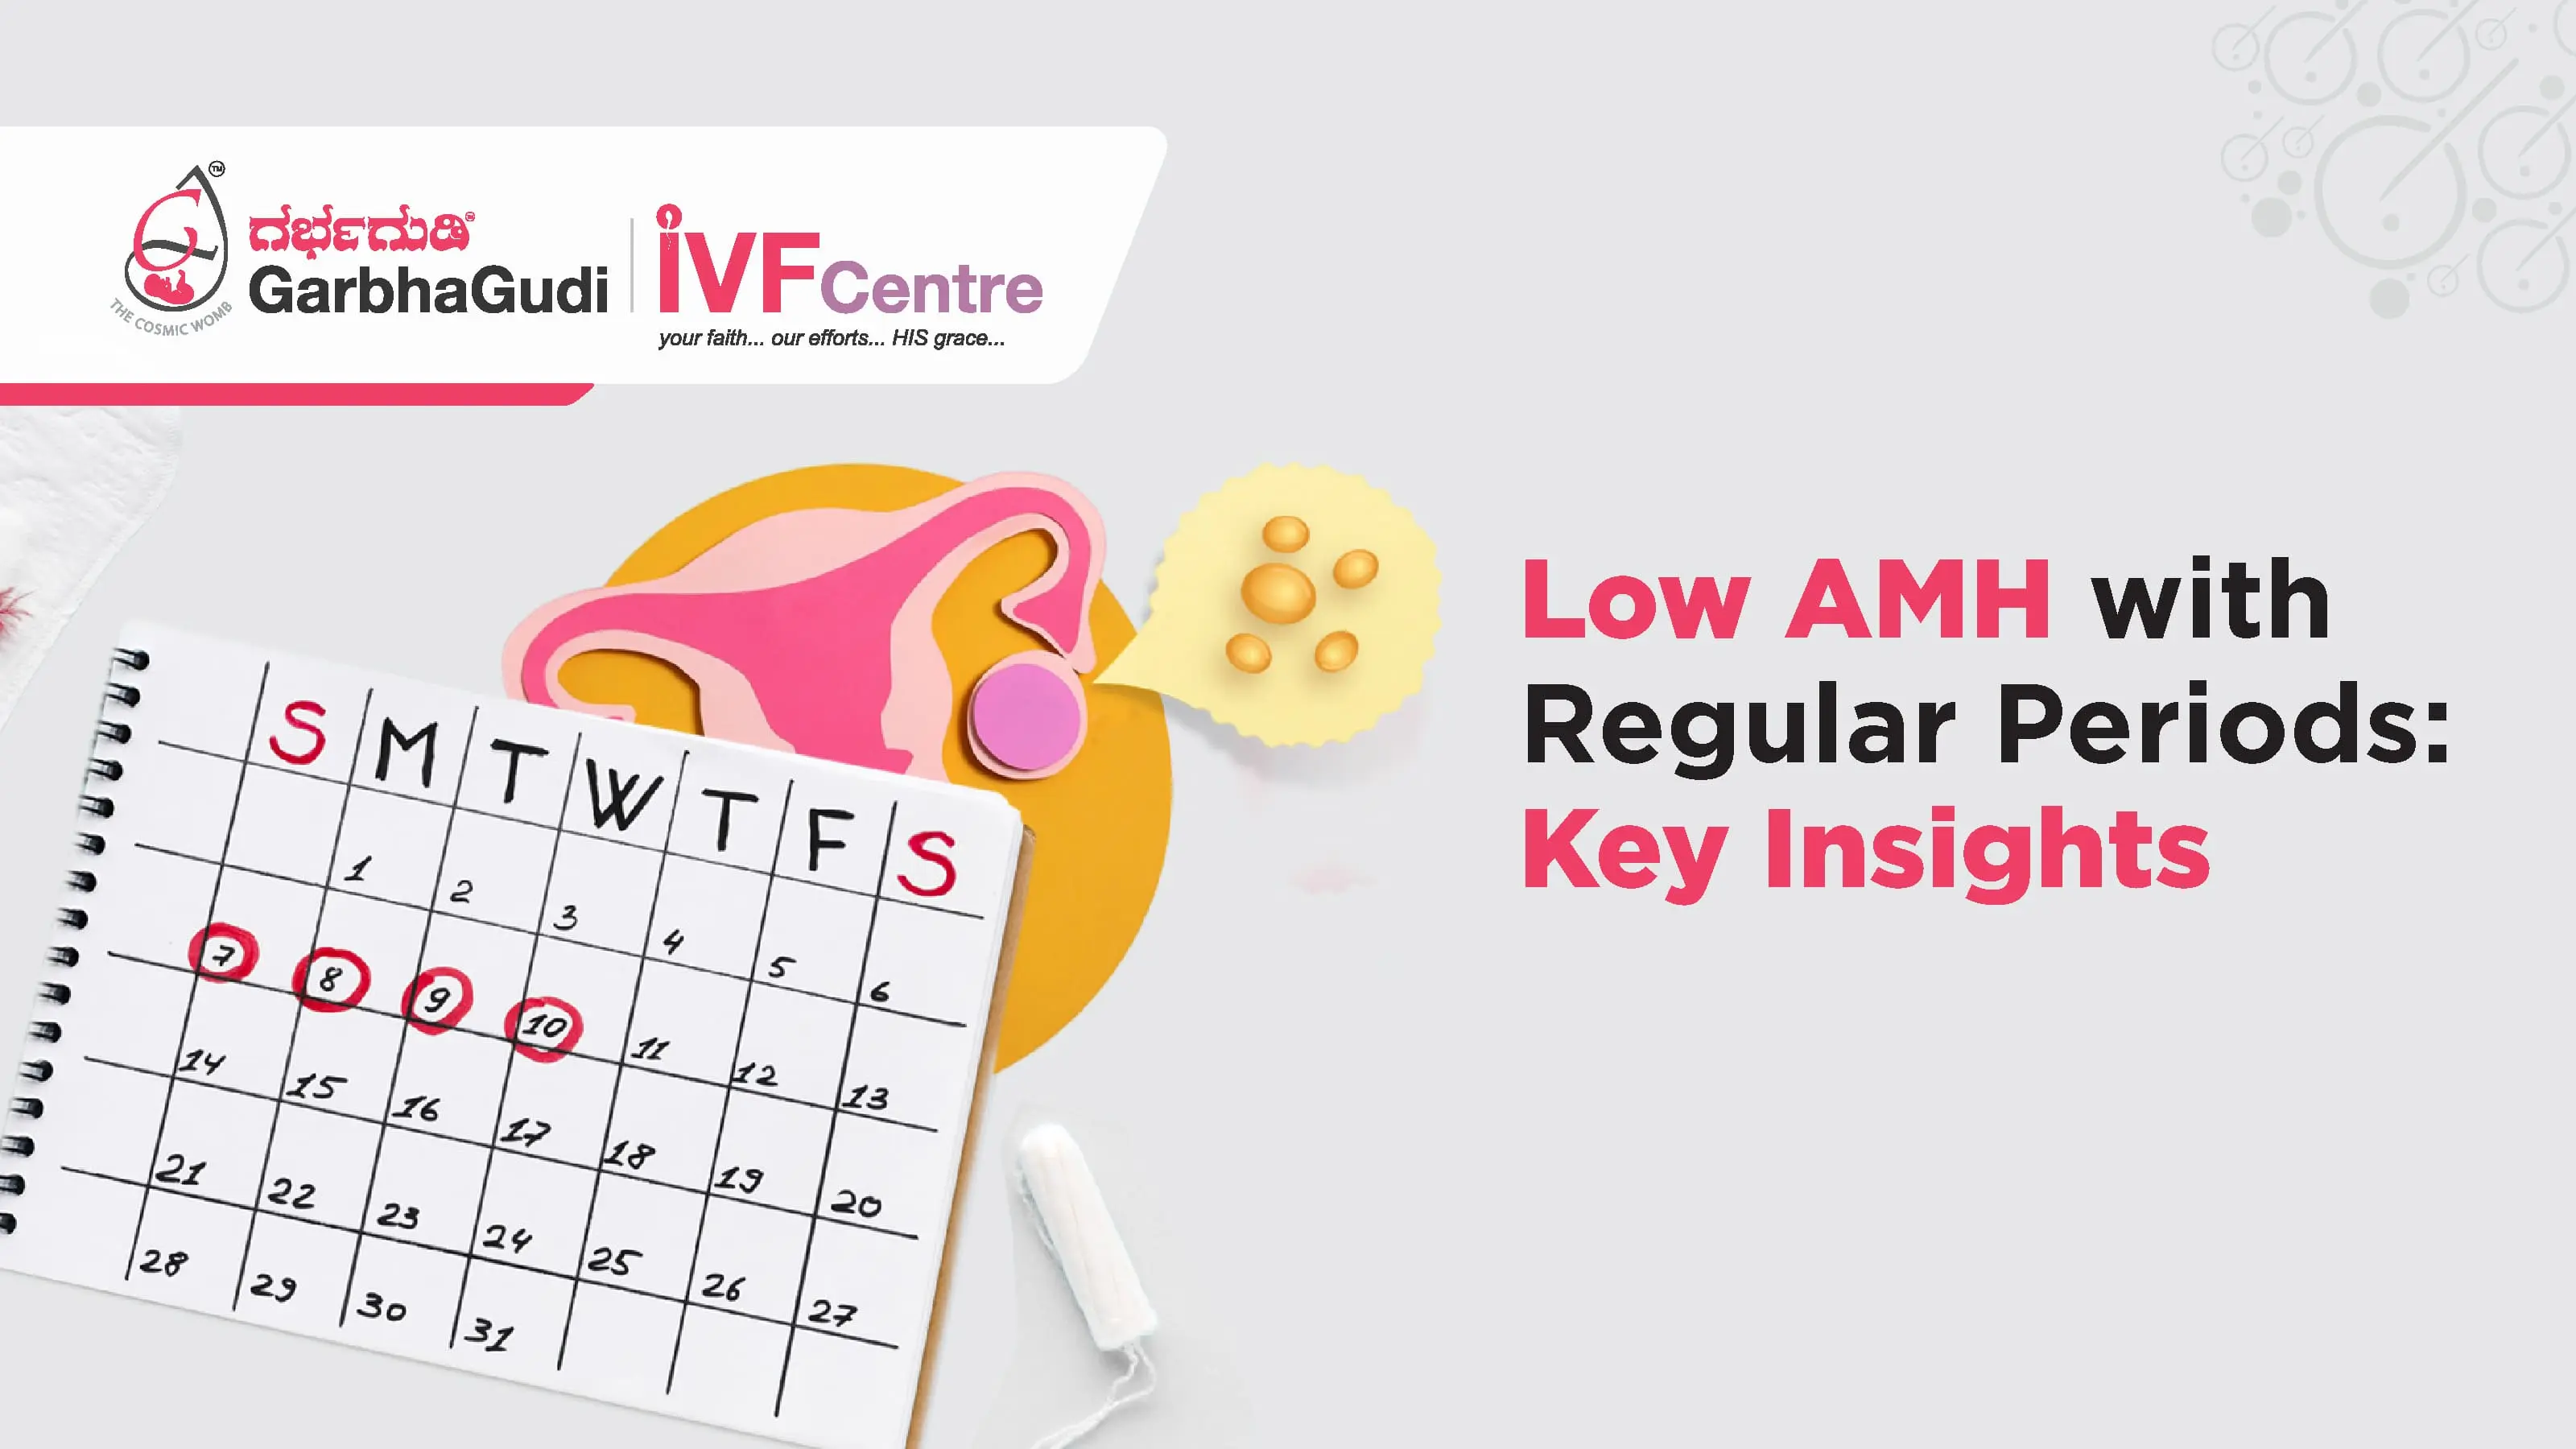 Low AMH with Regular Periods: Key Insights